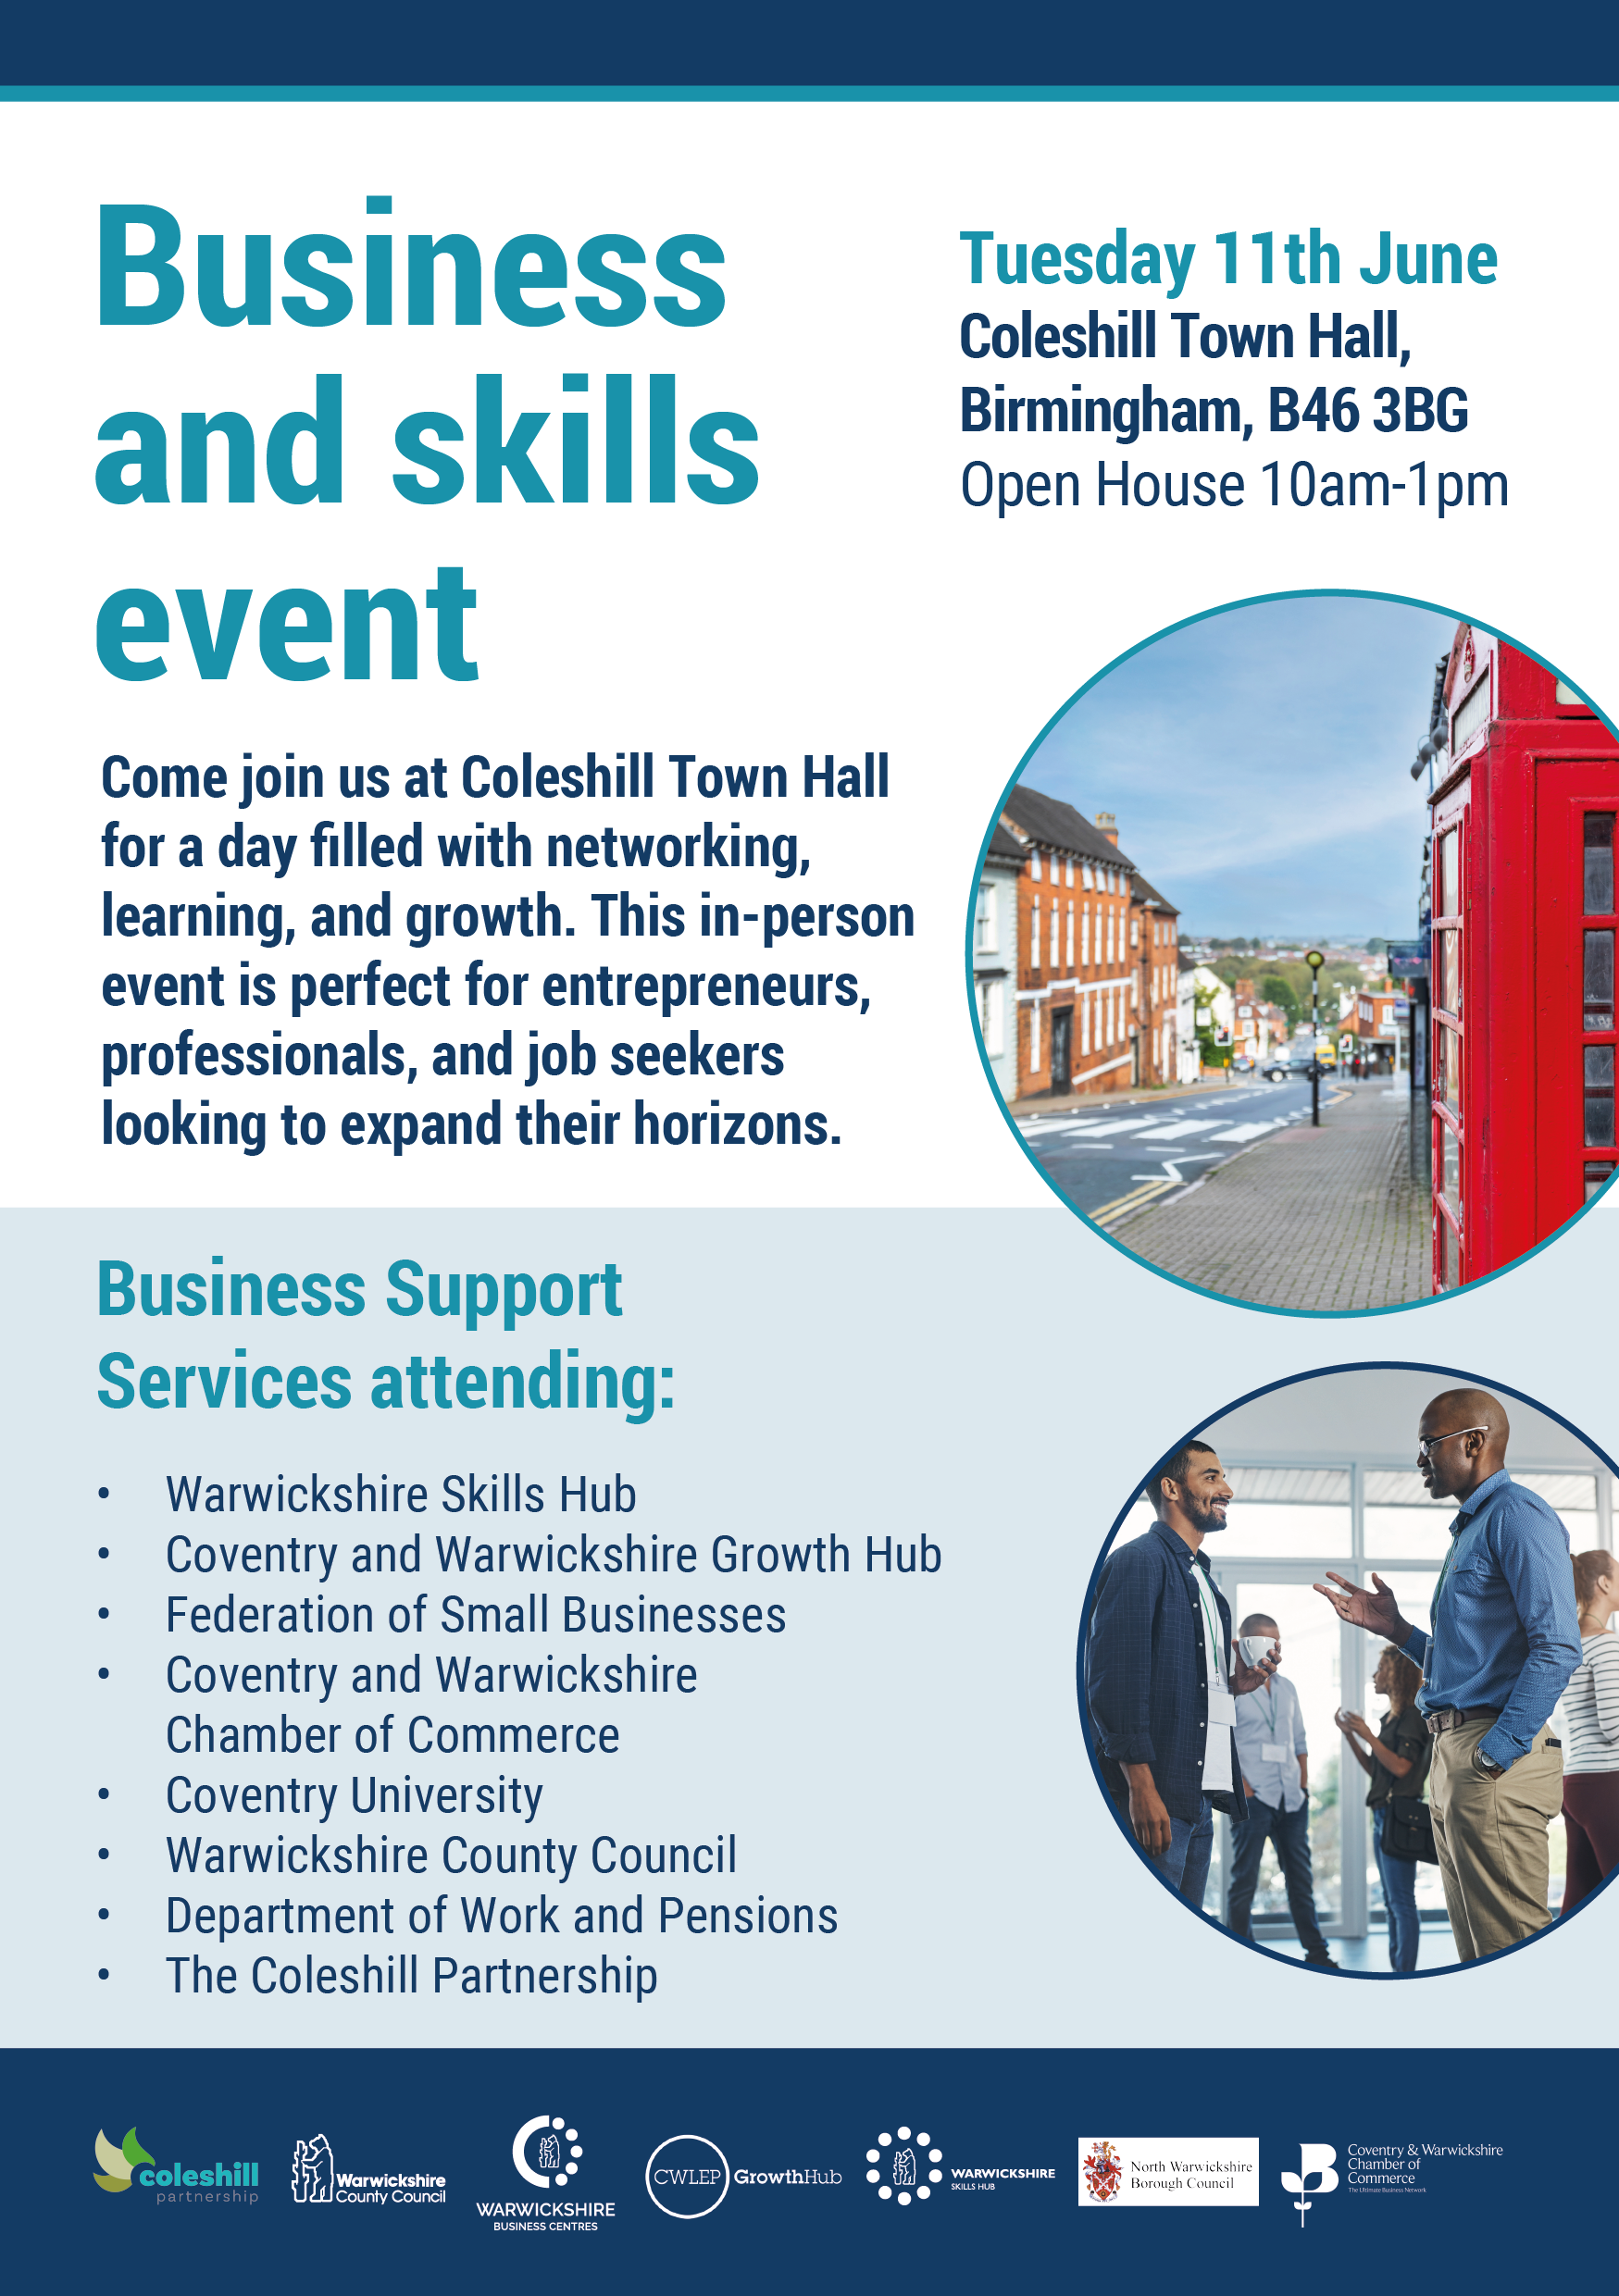 Business and skills event